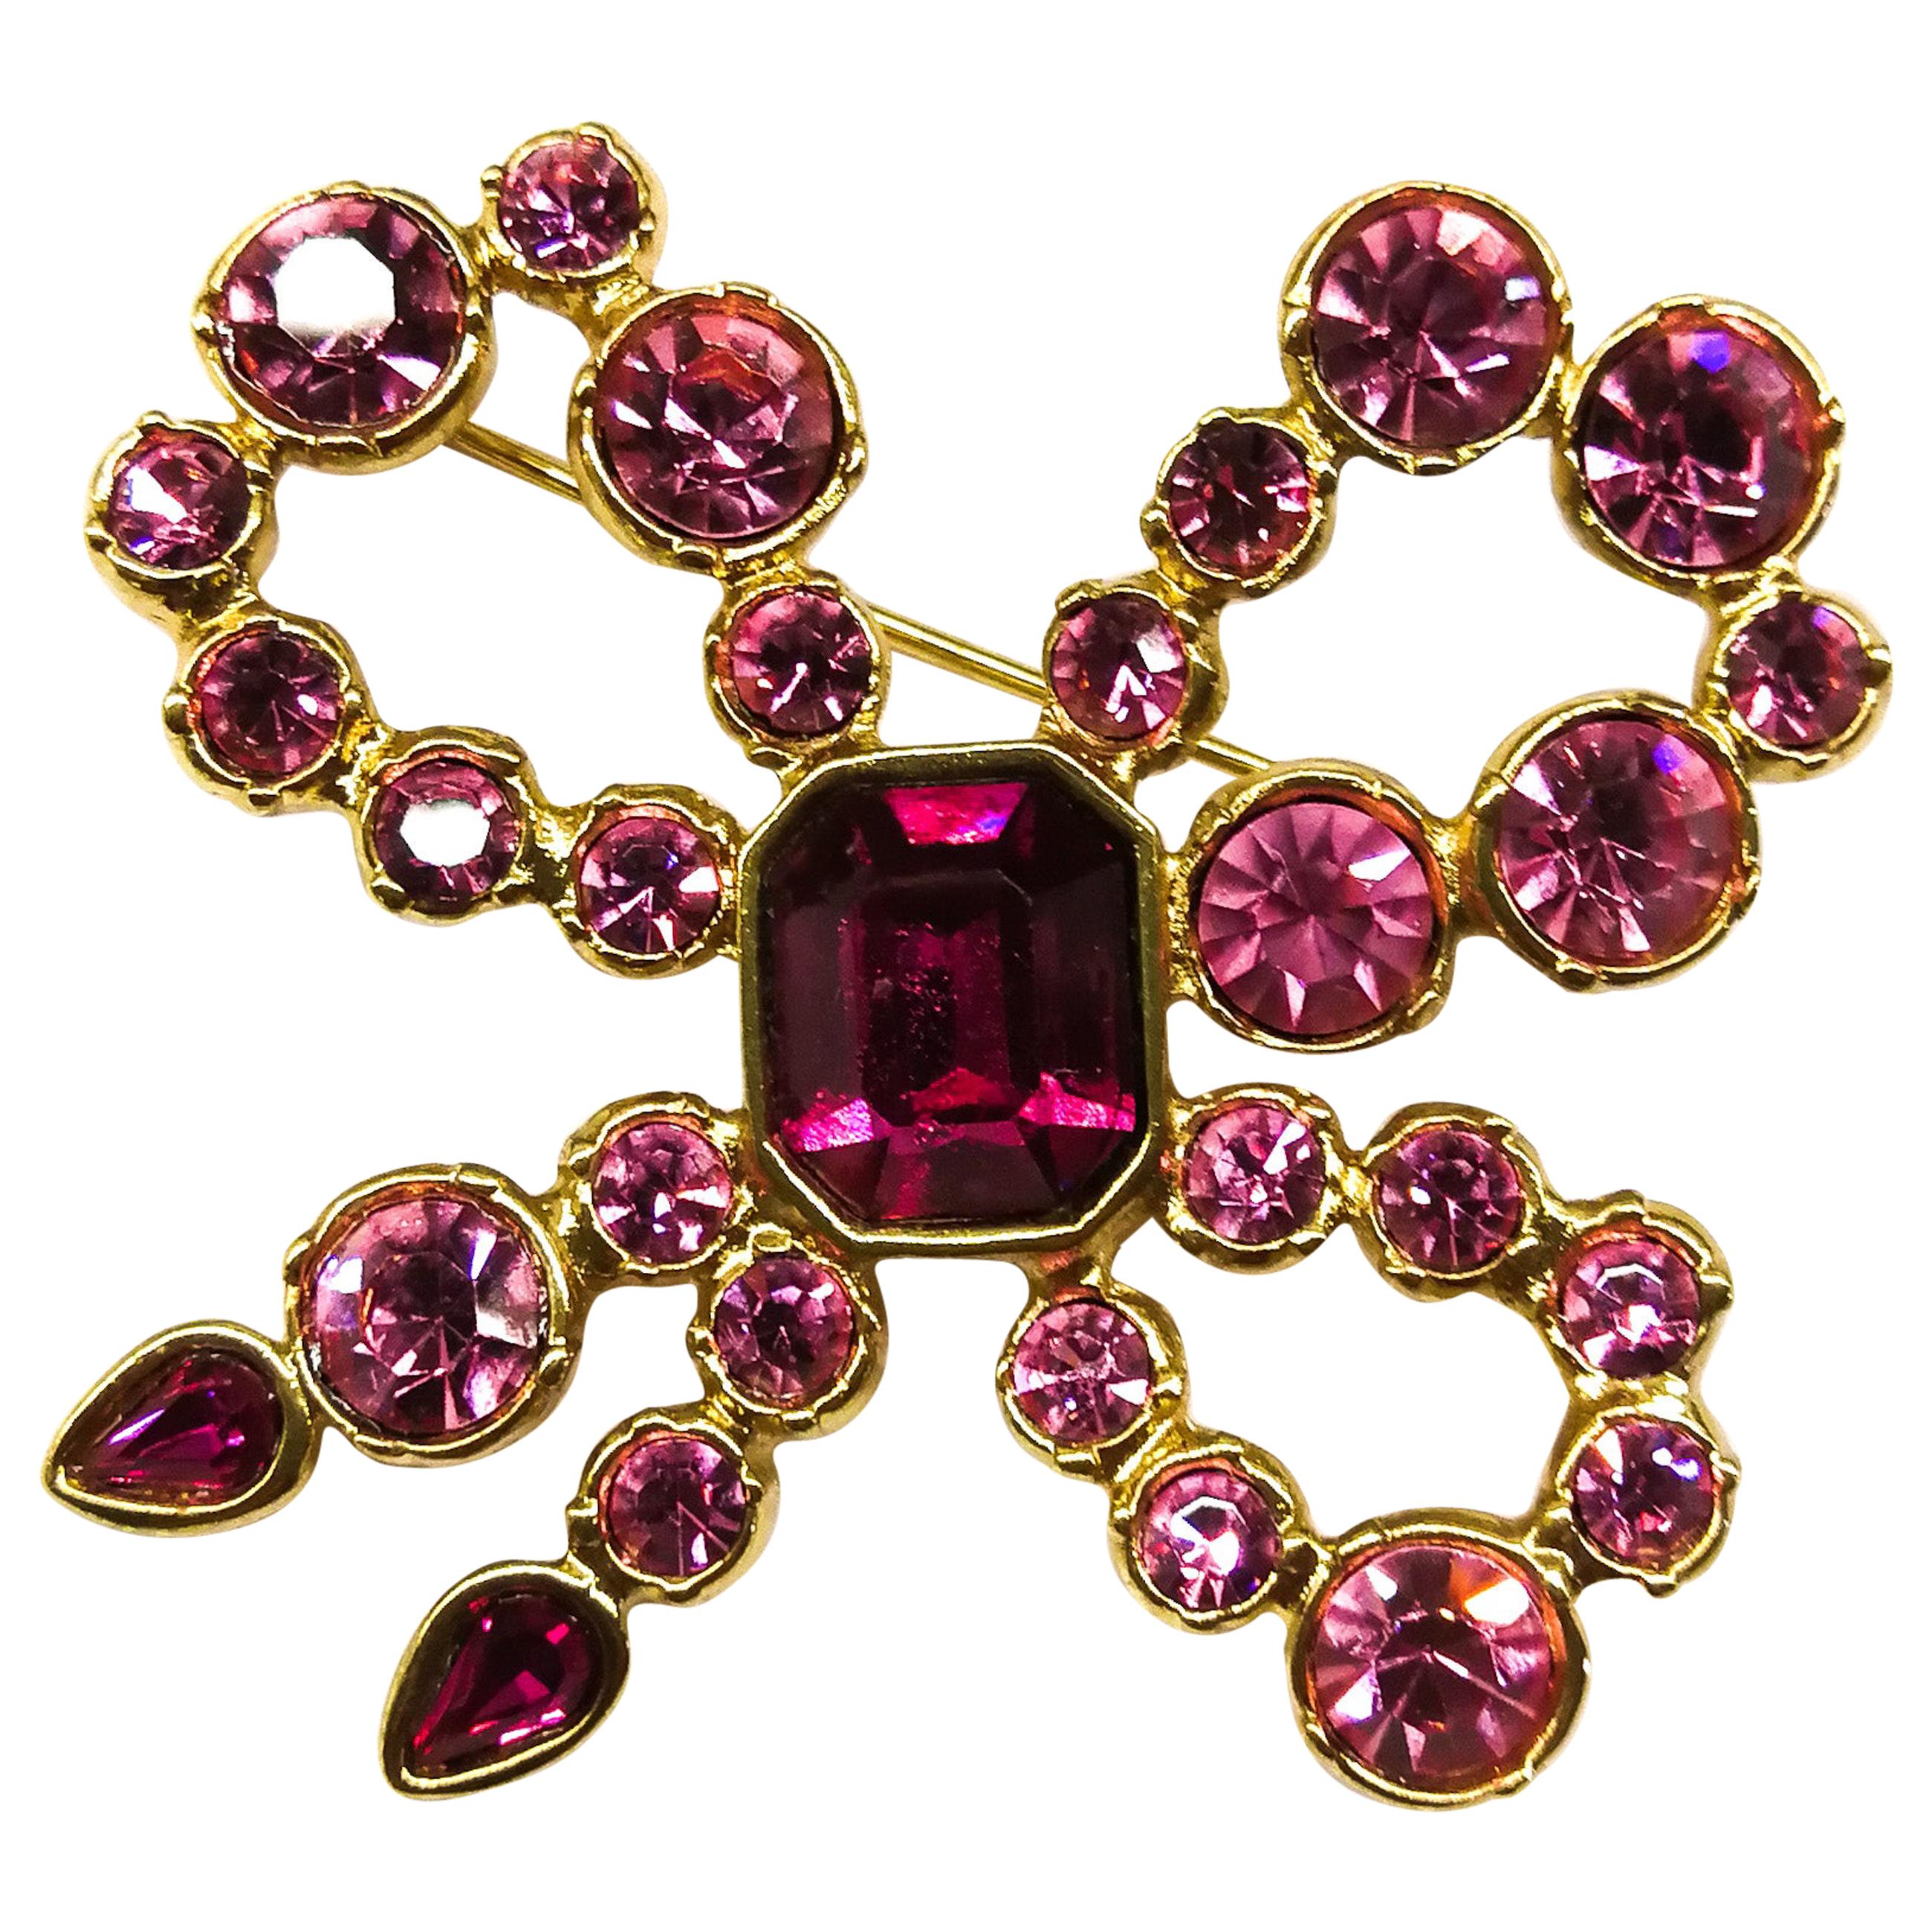 A pink paste and gilt metal 'bow' brooch, Yves Saint Laurent, France, 1980s